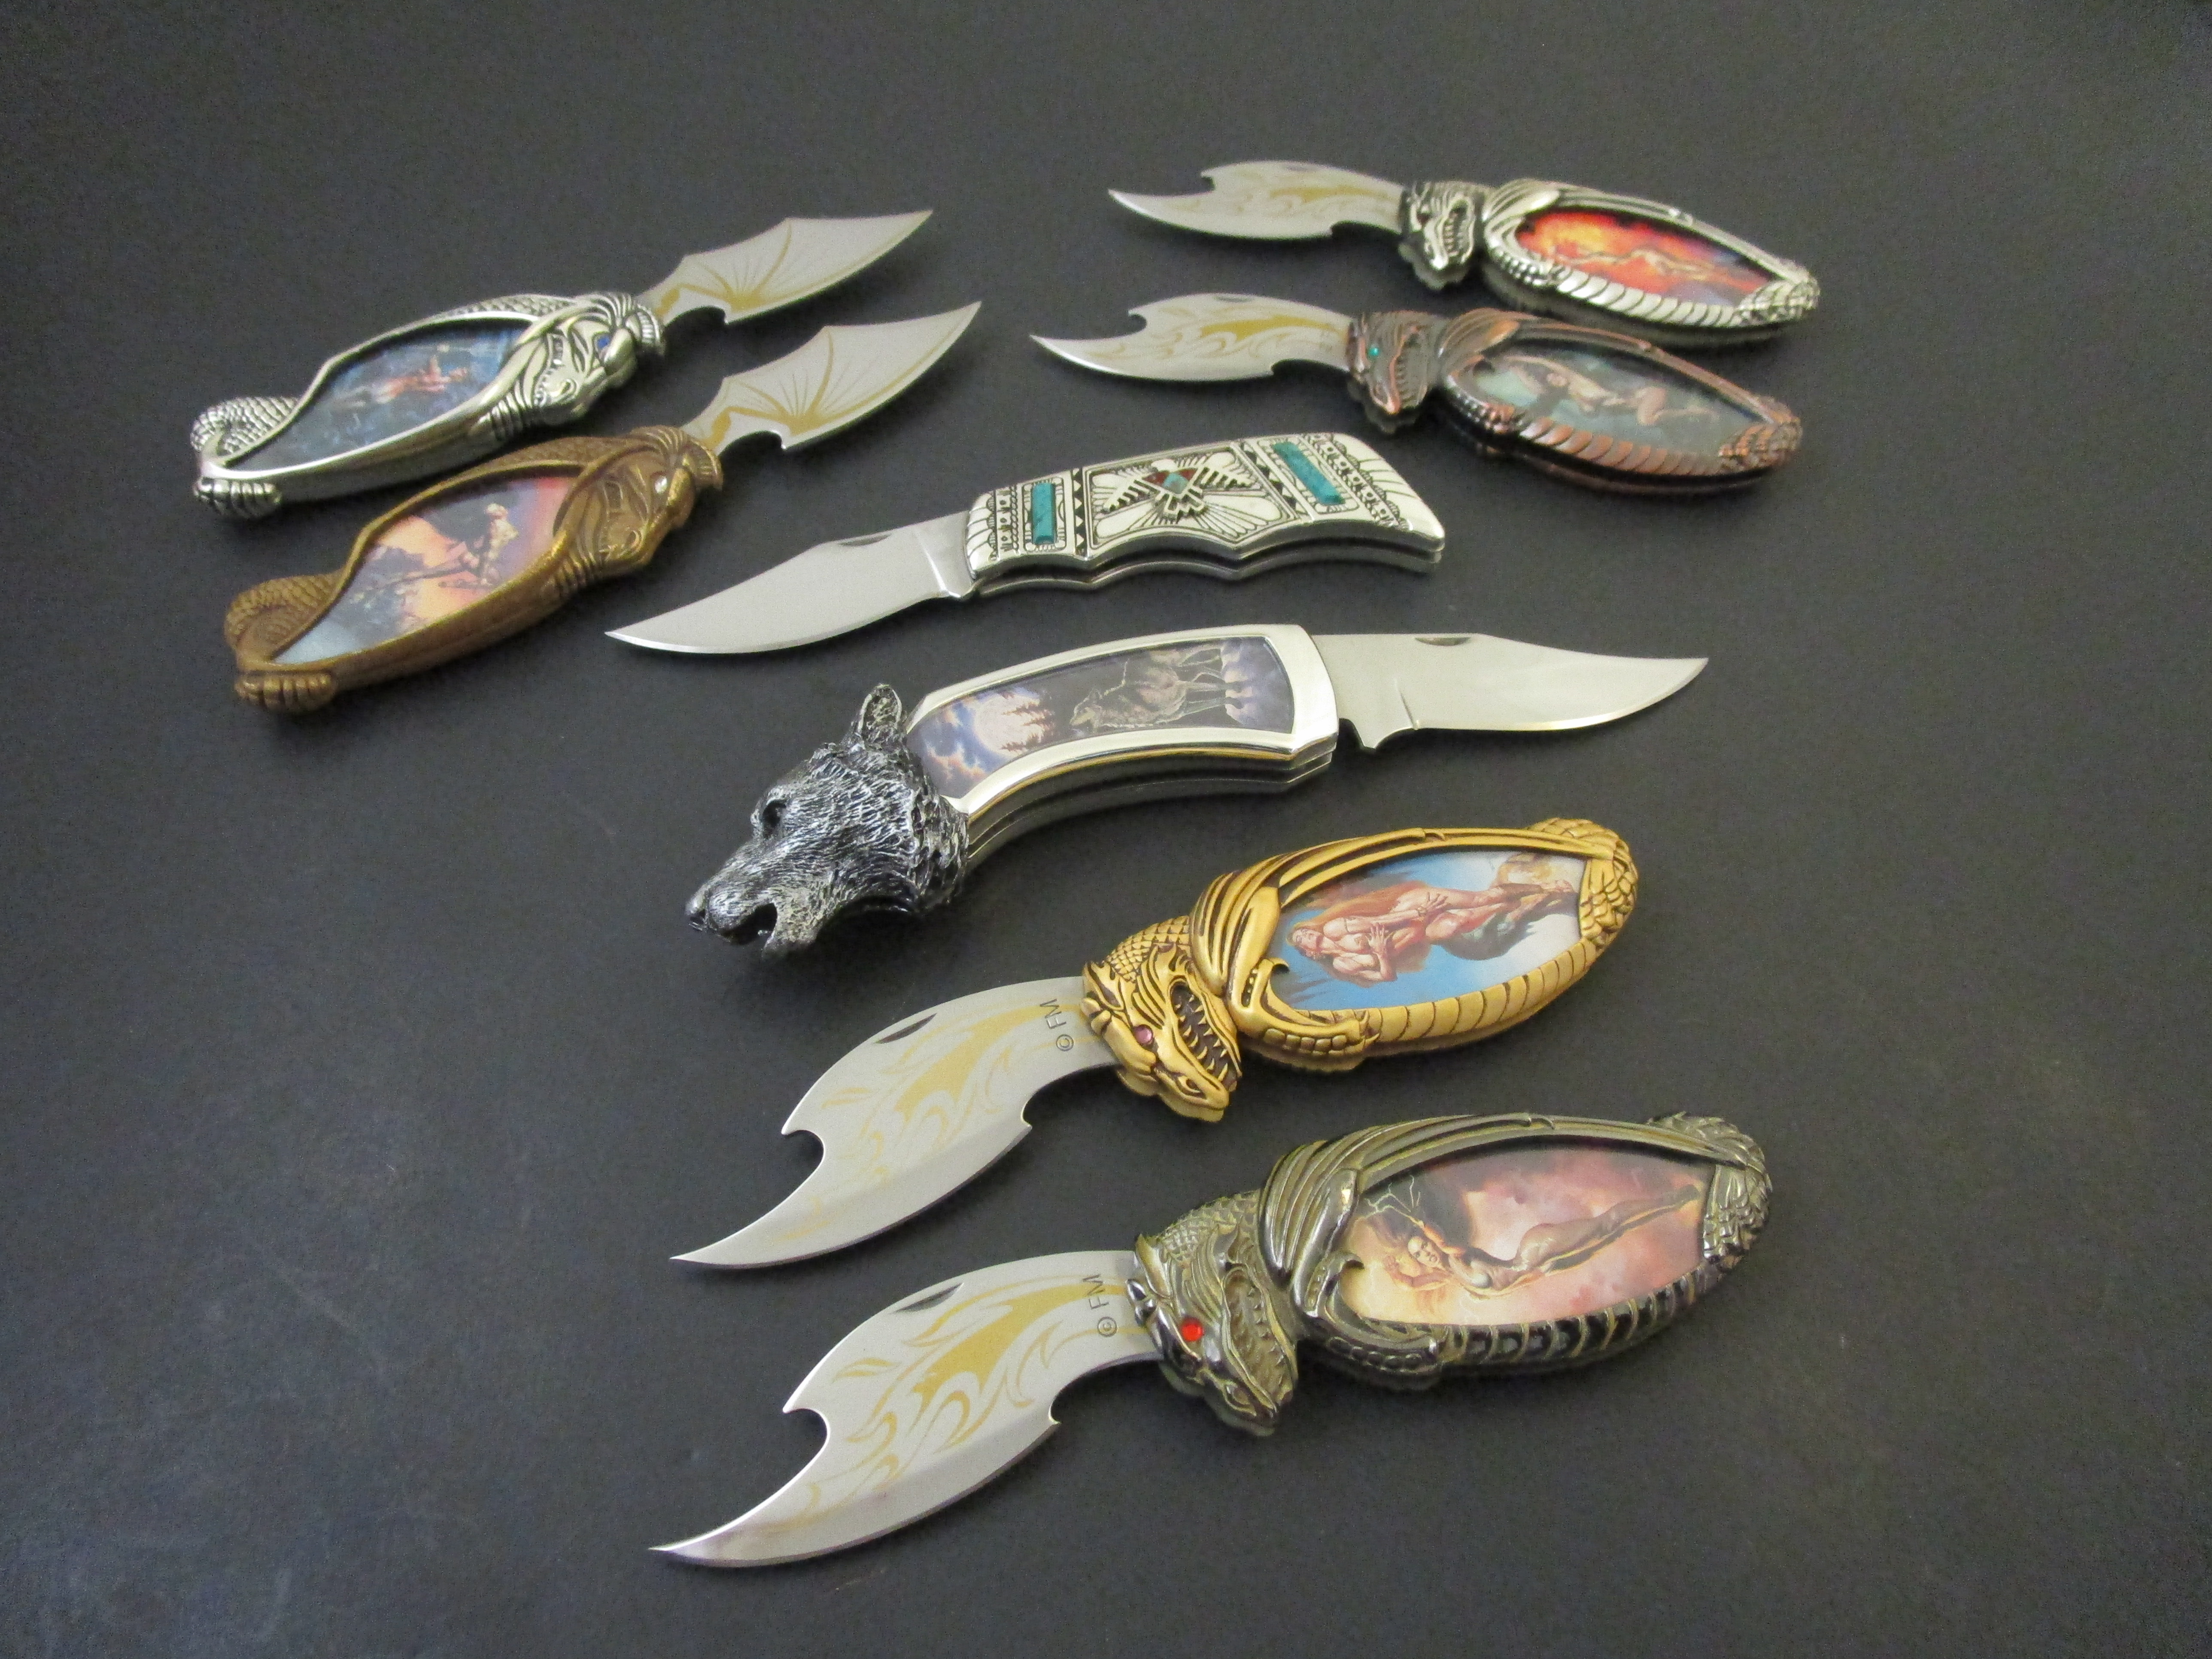 Collection of 8 Franklin Mint Collectable Knives